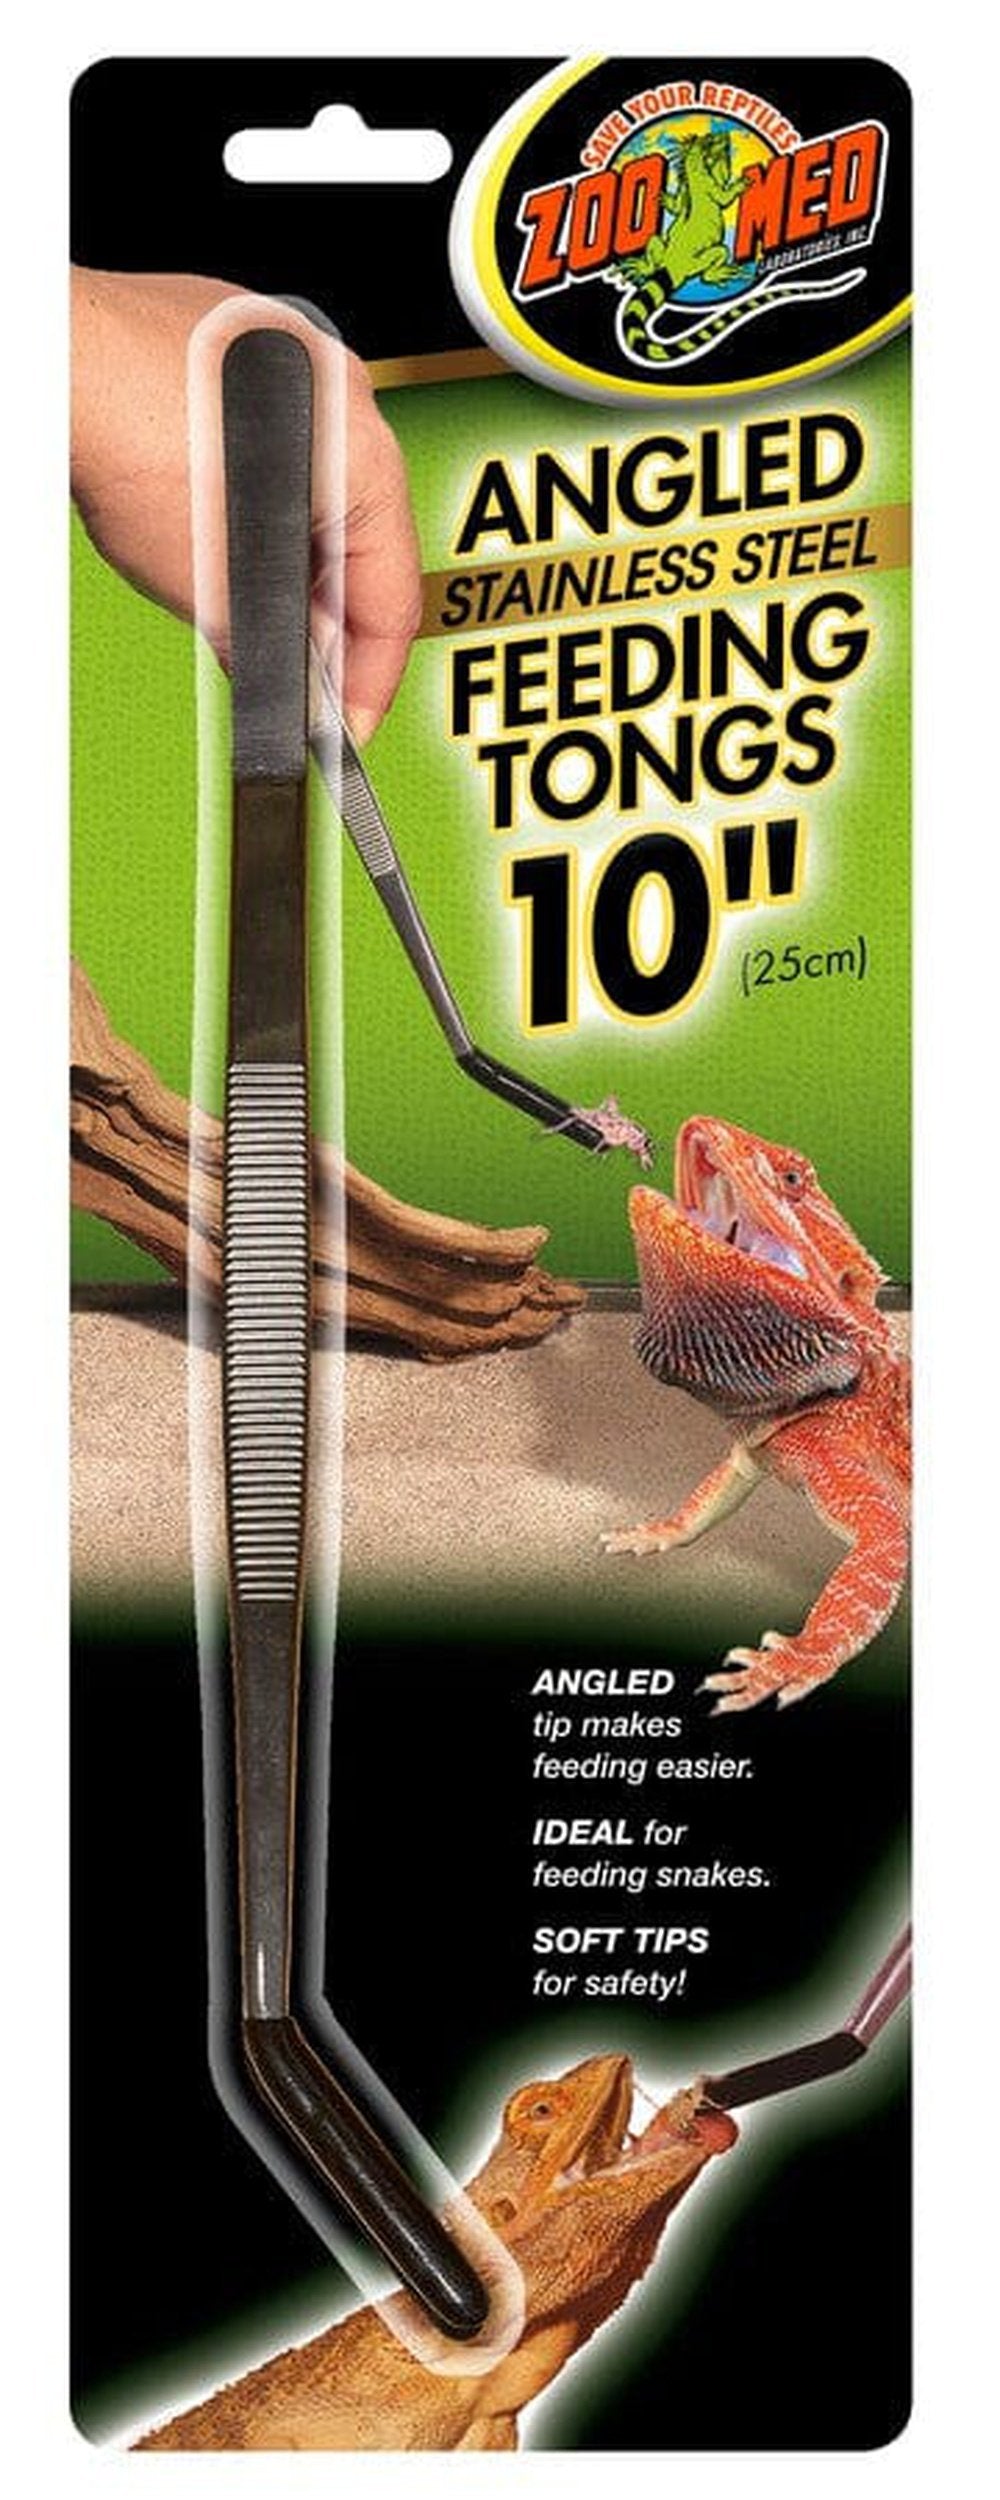 reptile feeding tongs, reptile feeding tongs Suppliers and Manufacturers at